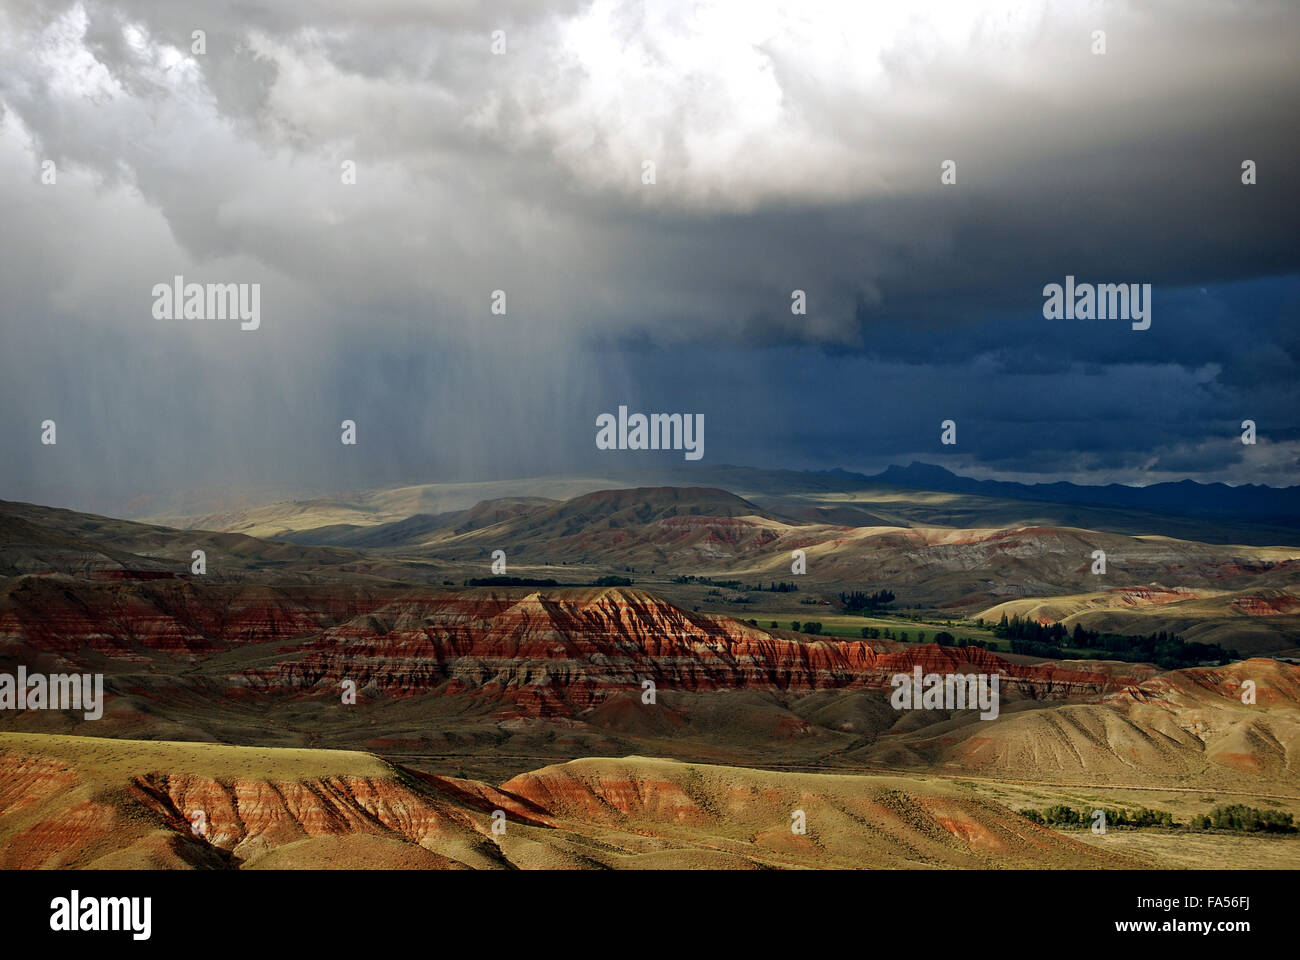 Big Storm approaching (Badlands on the Wind River, WY) Stock Photo